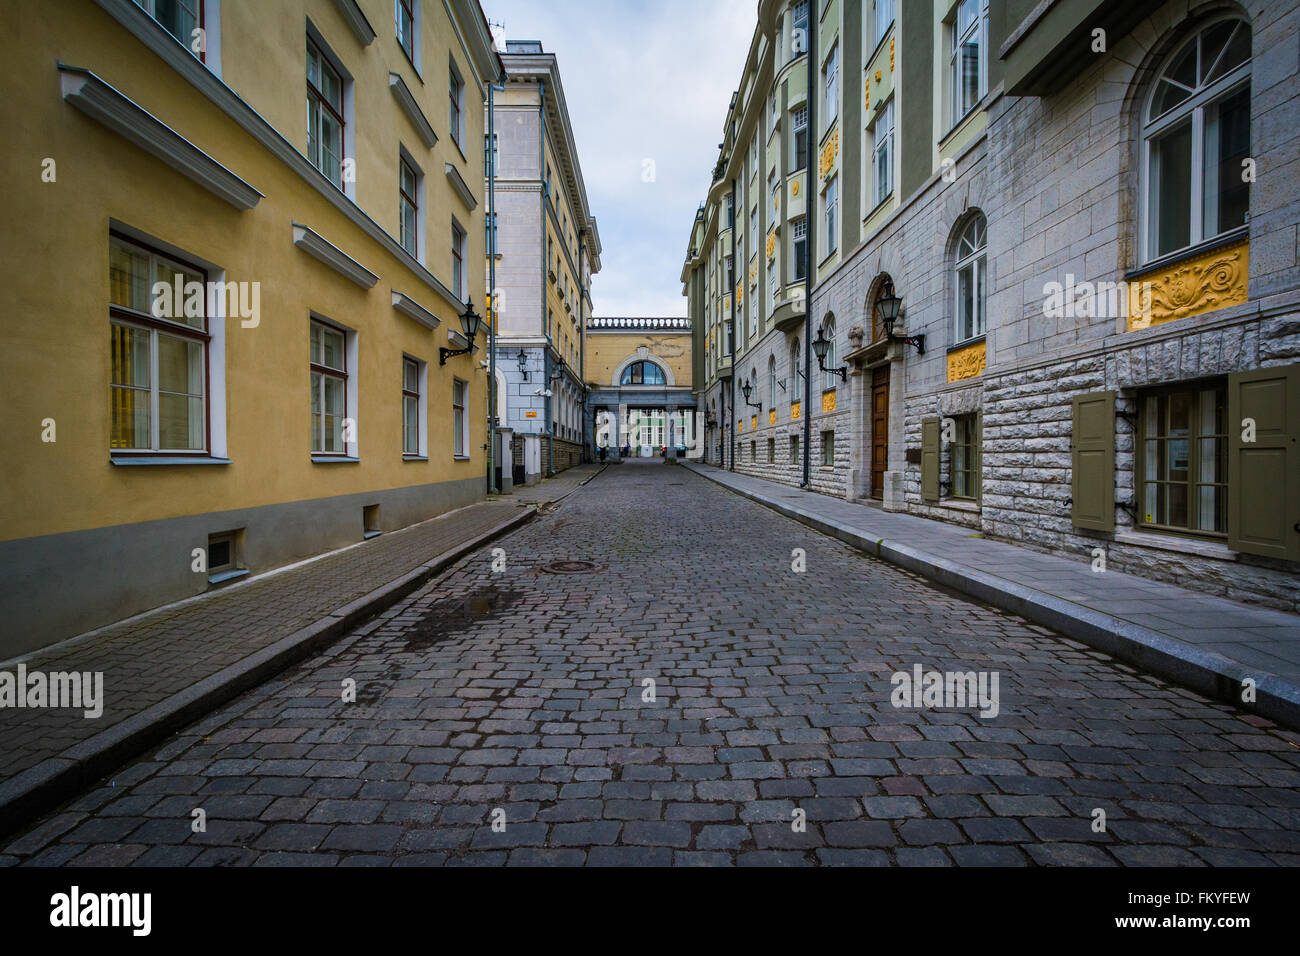 Cobblestone street and medieval architecture in the Old Town of Tallinn, Estonia. Stock Photo